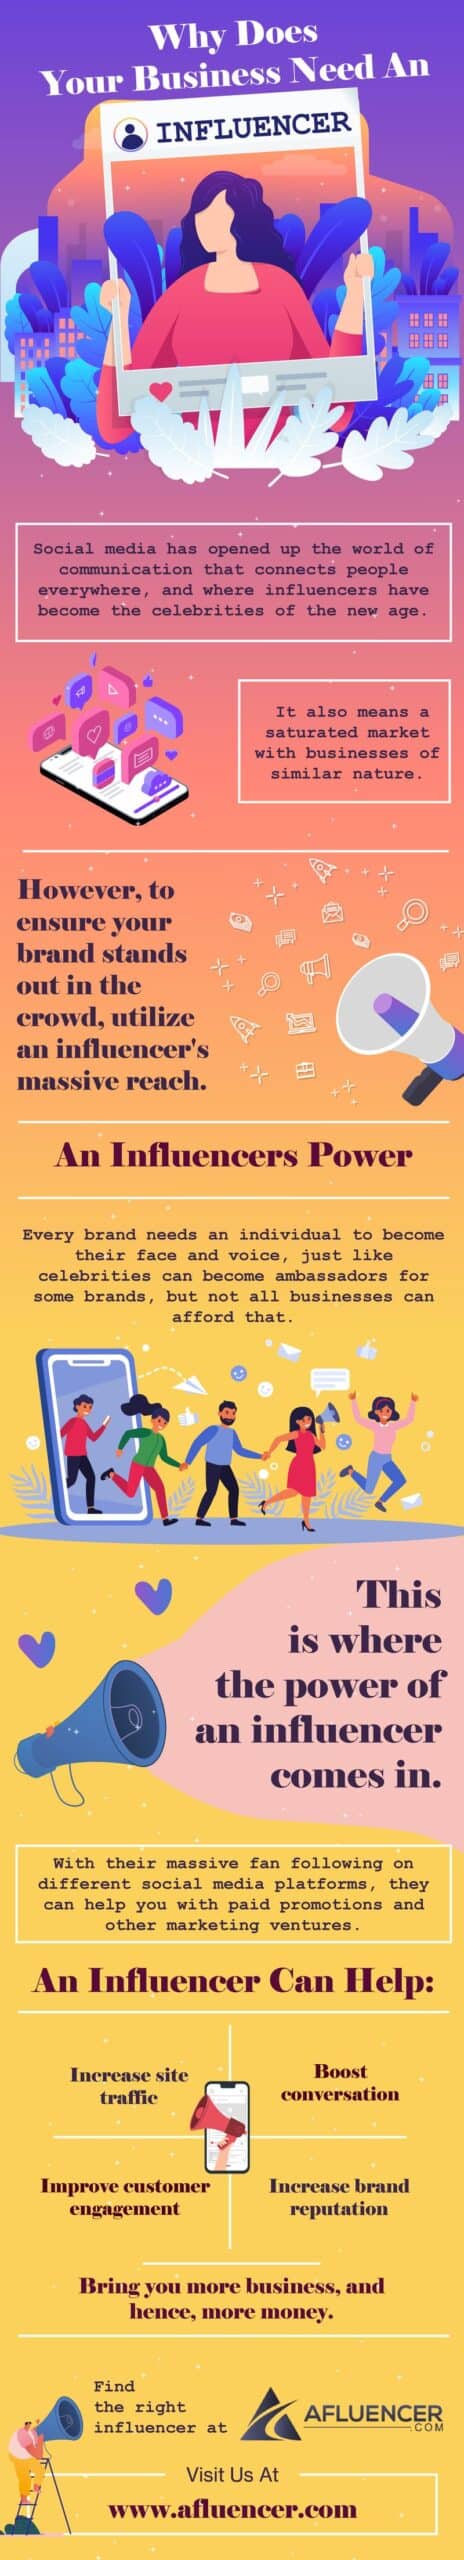 Why Does Your Business Need An Influencer